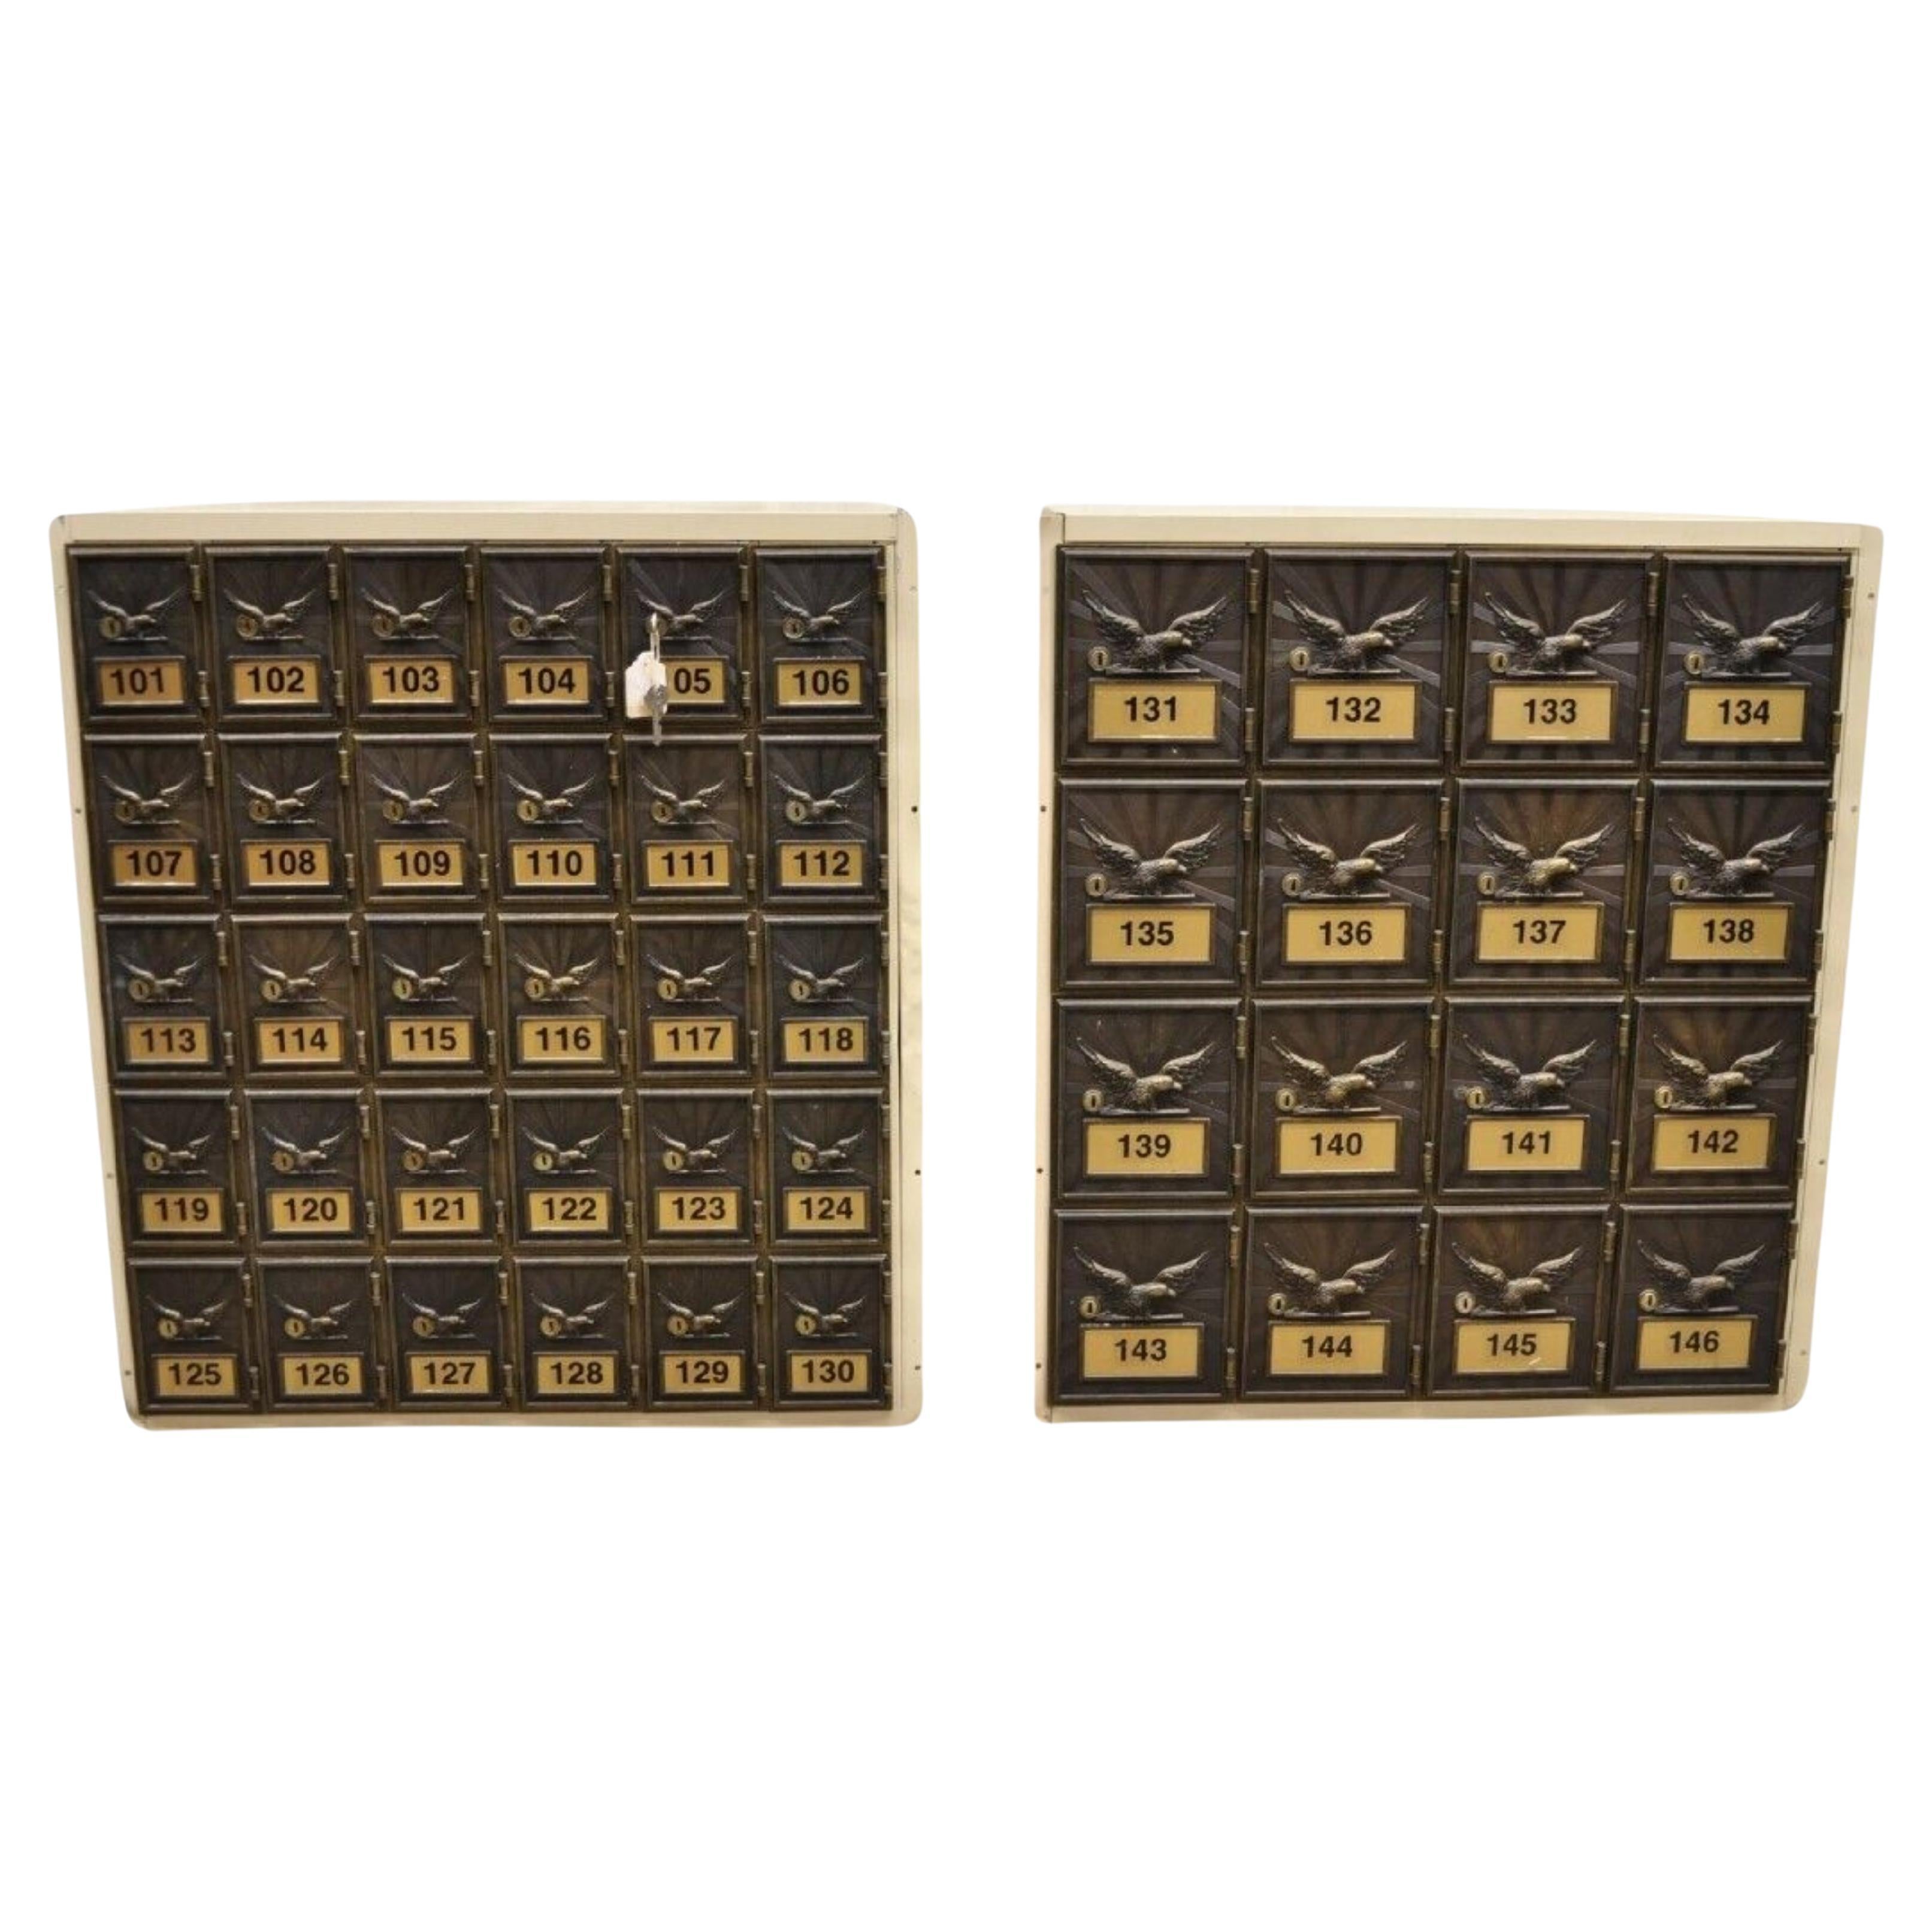 Vintage Post Office Apartment Mailbox Metal Cabinet with Eagle Doors - Set of 2 For Sale